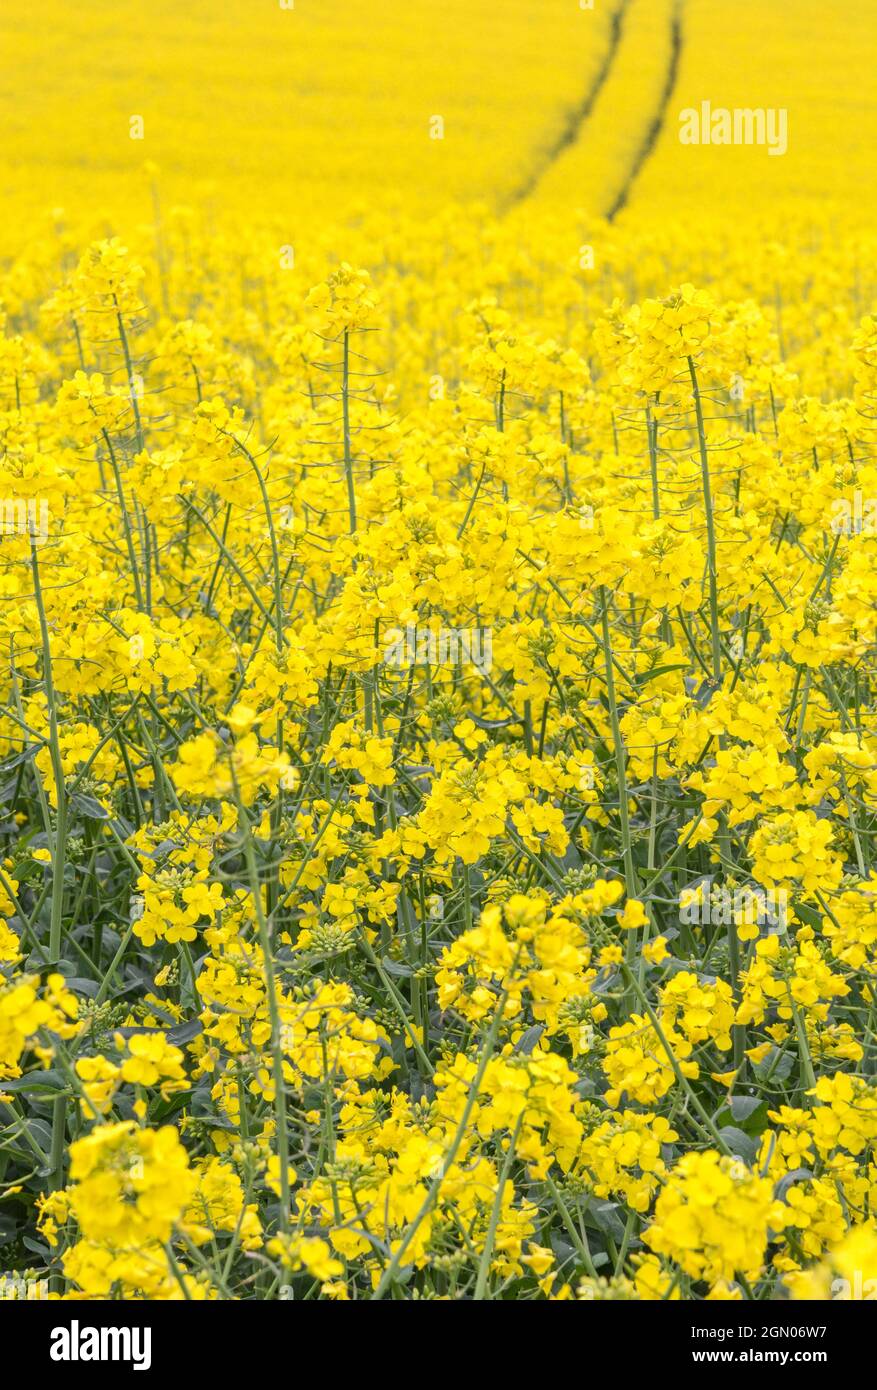 Field of flowering Oilseed Rape, Canola / Brassica napus variety in cultivation in UK. See FOCUS note in 'description'. Stock Photo